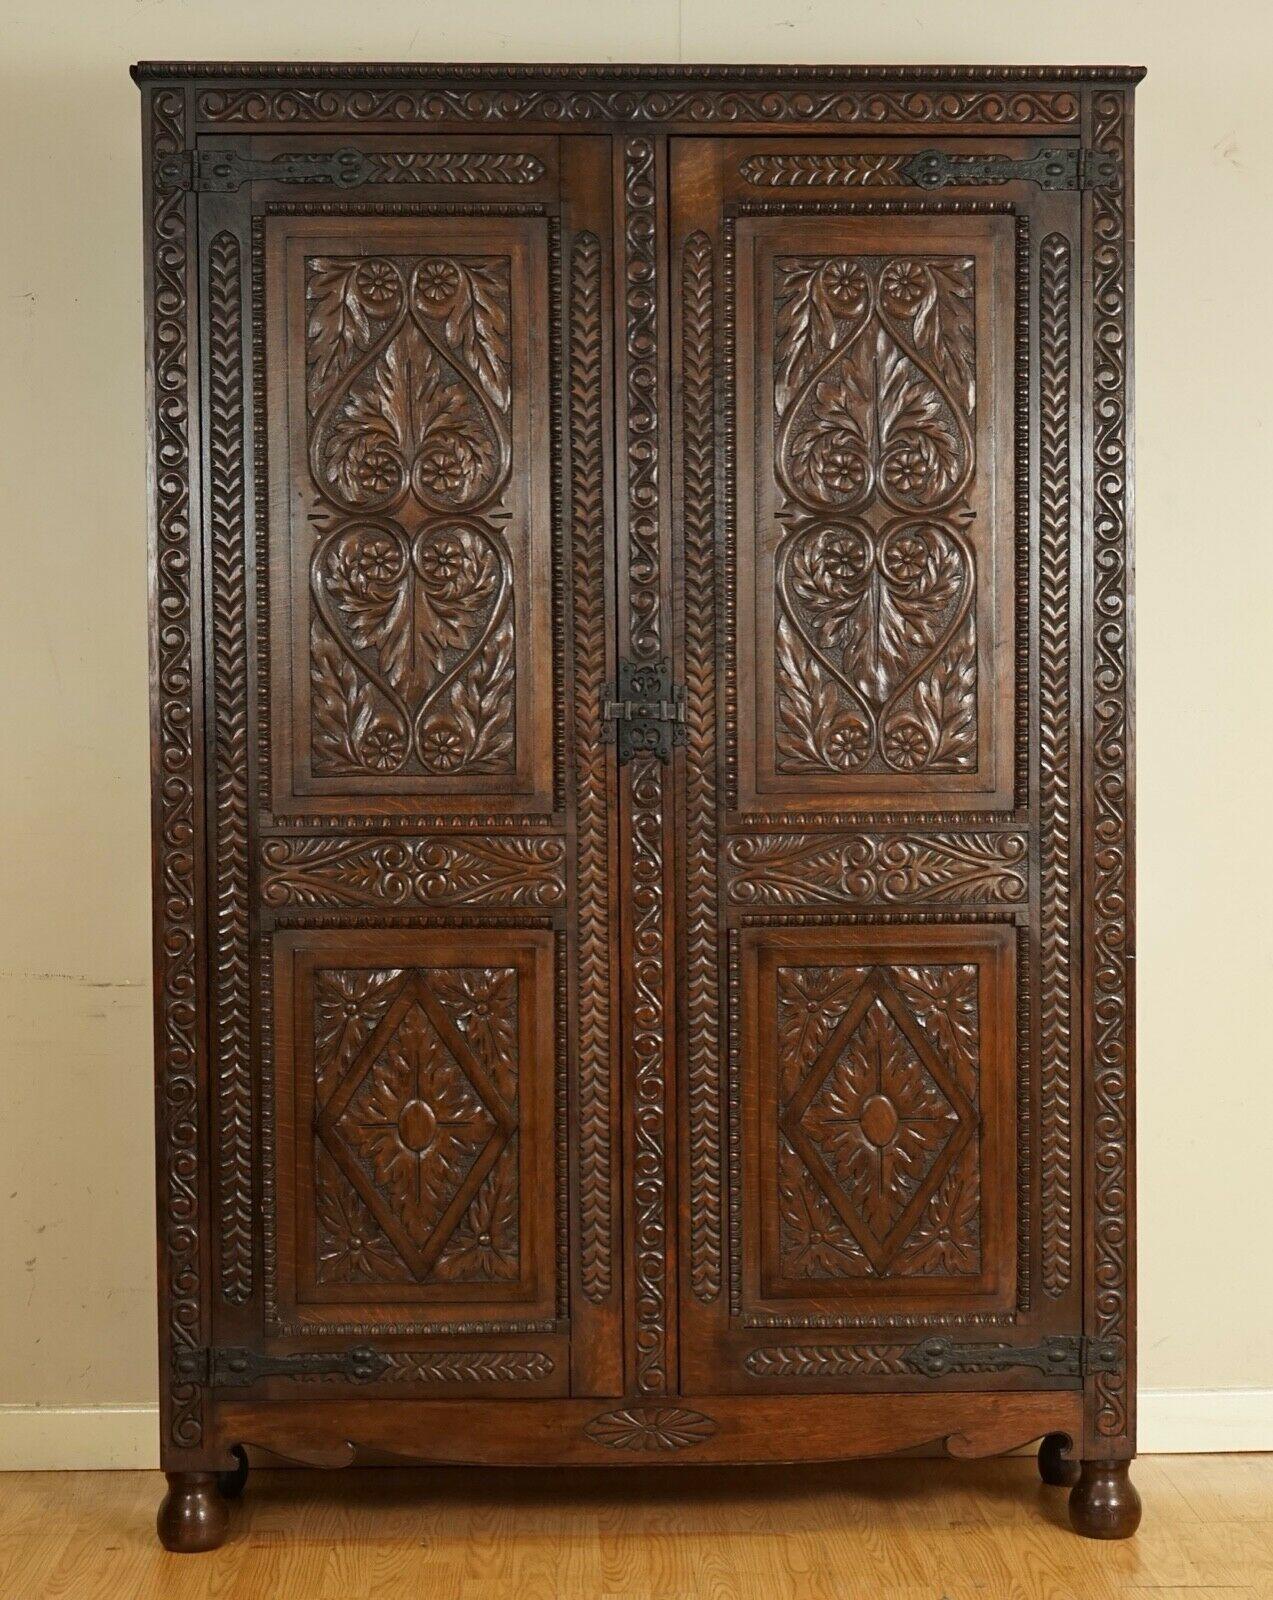 We are delighted to offer for sale this Stunning heavily carved oak estate housekeepers hall cabinet.
It's such a stunning piece to have in any hallway or room, it will make a statement.
It is heavily carved all over and has a great patina as it